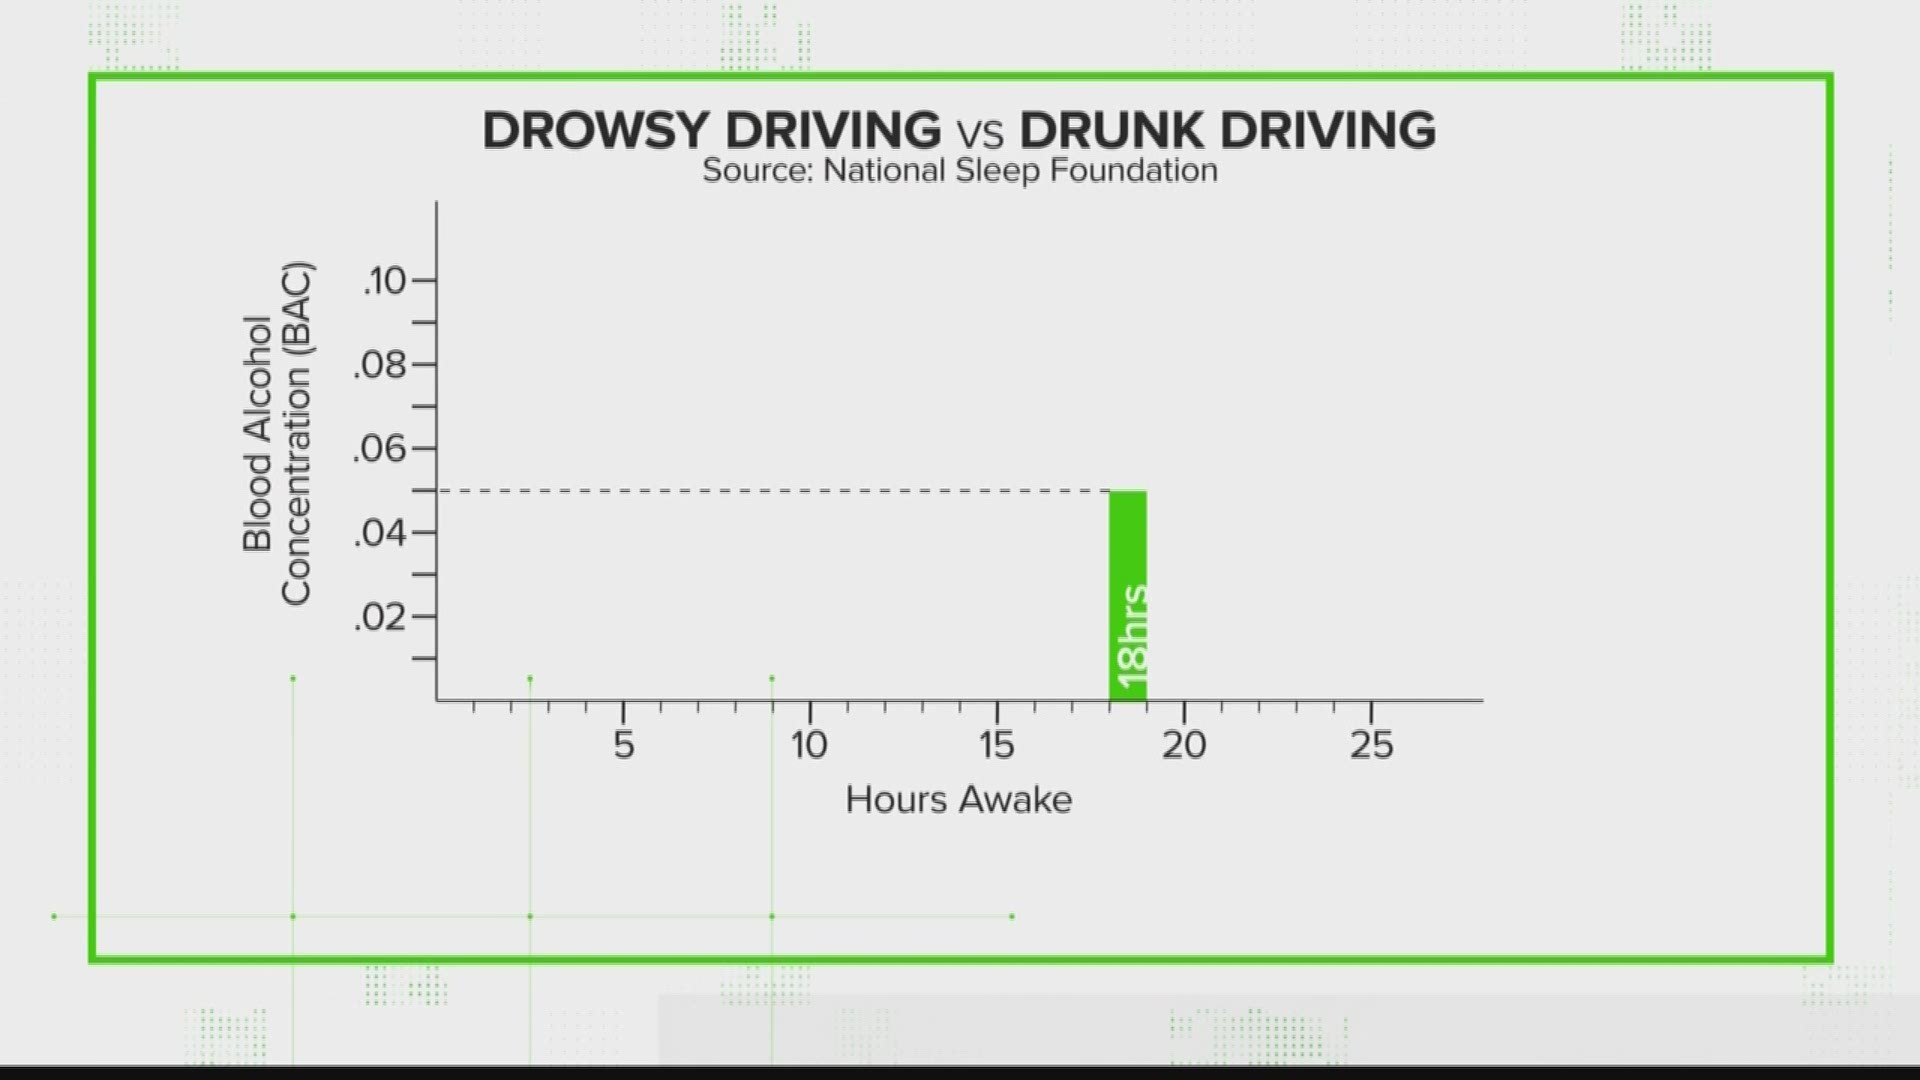 Drunk driving is something people hear about often, but could lack of sleep put other drivers against the same risks?